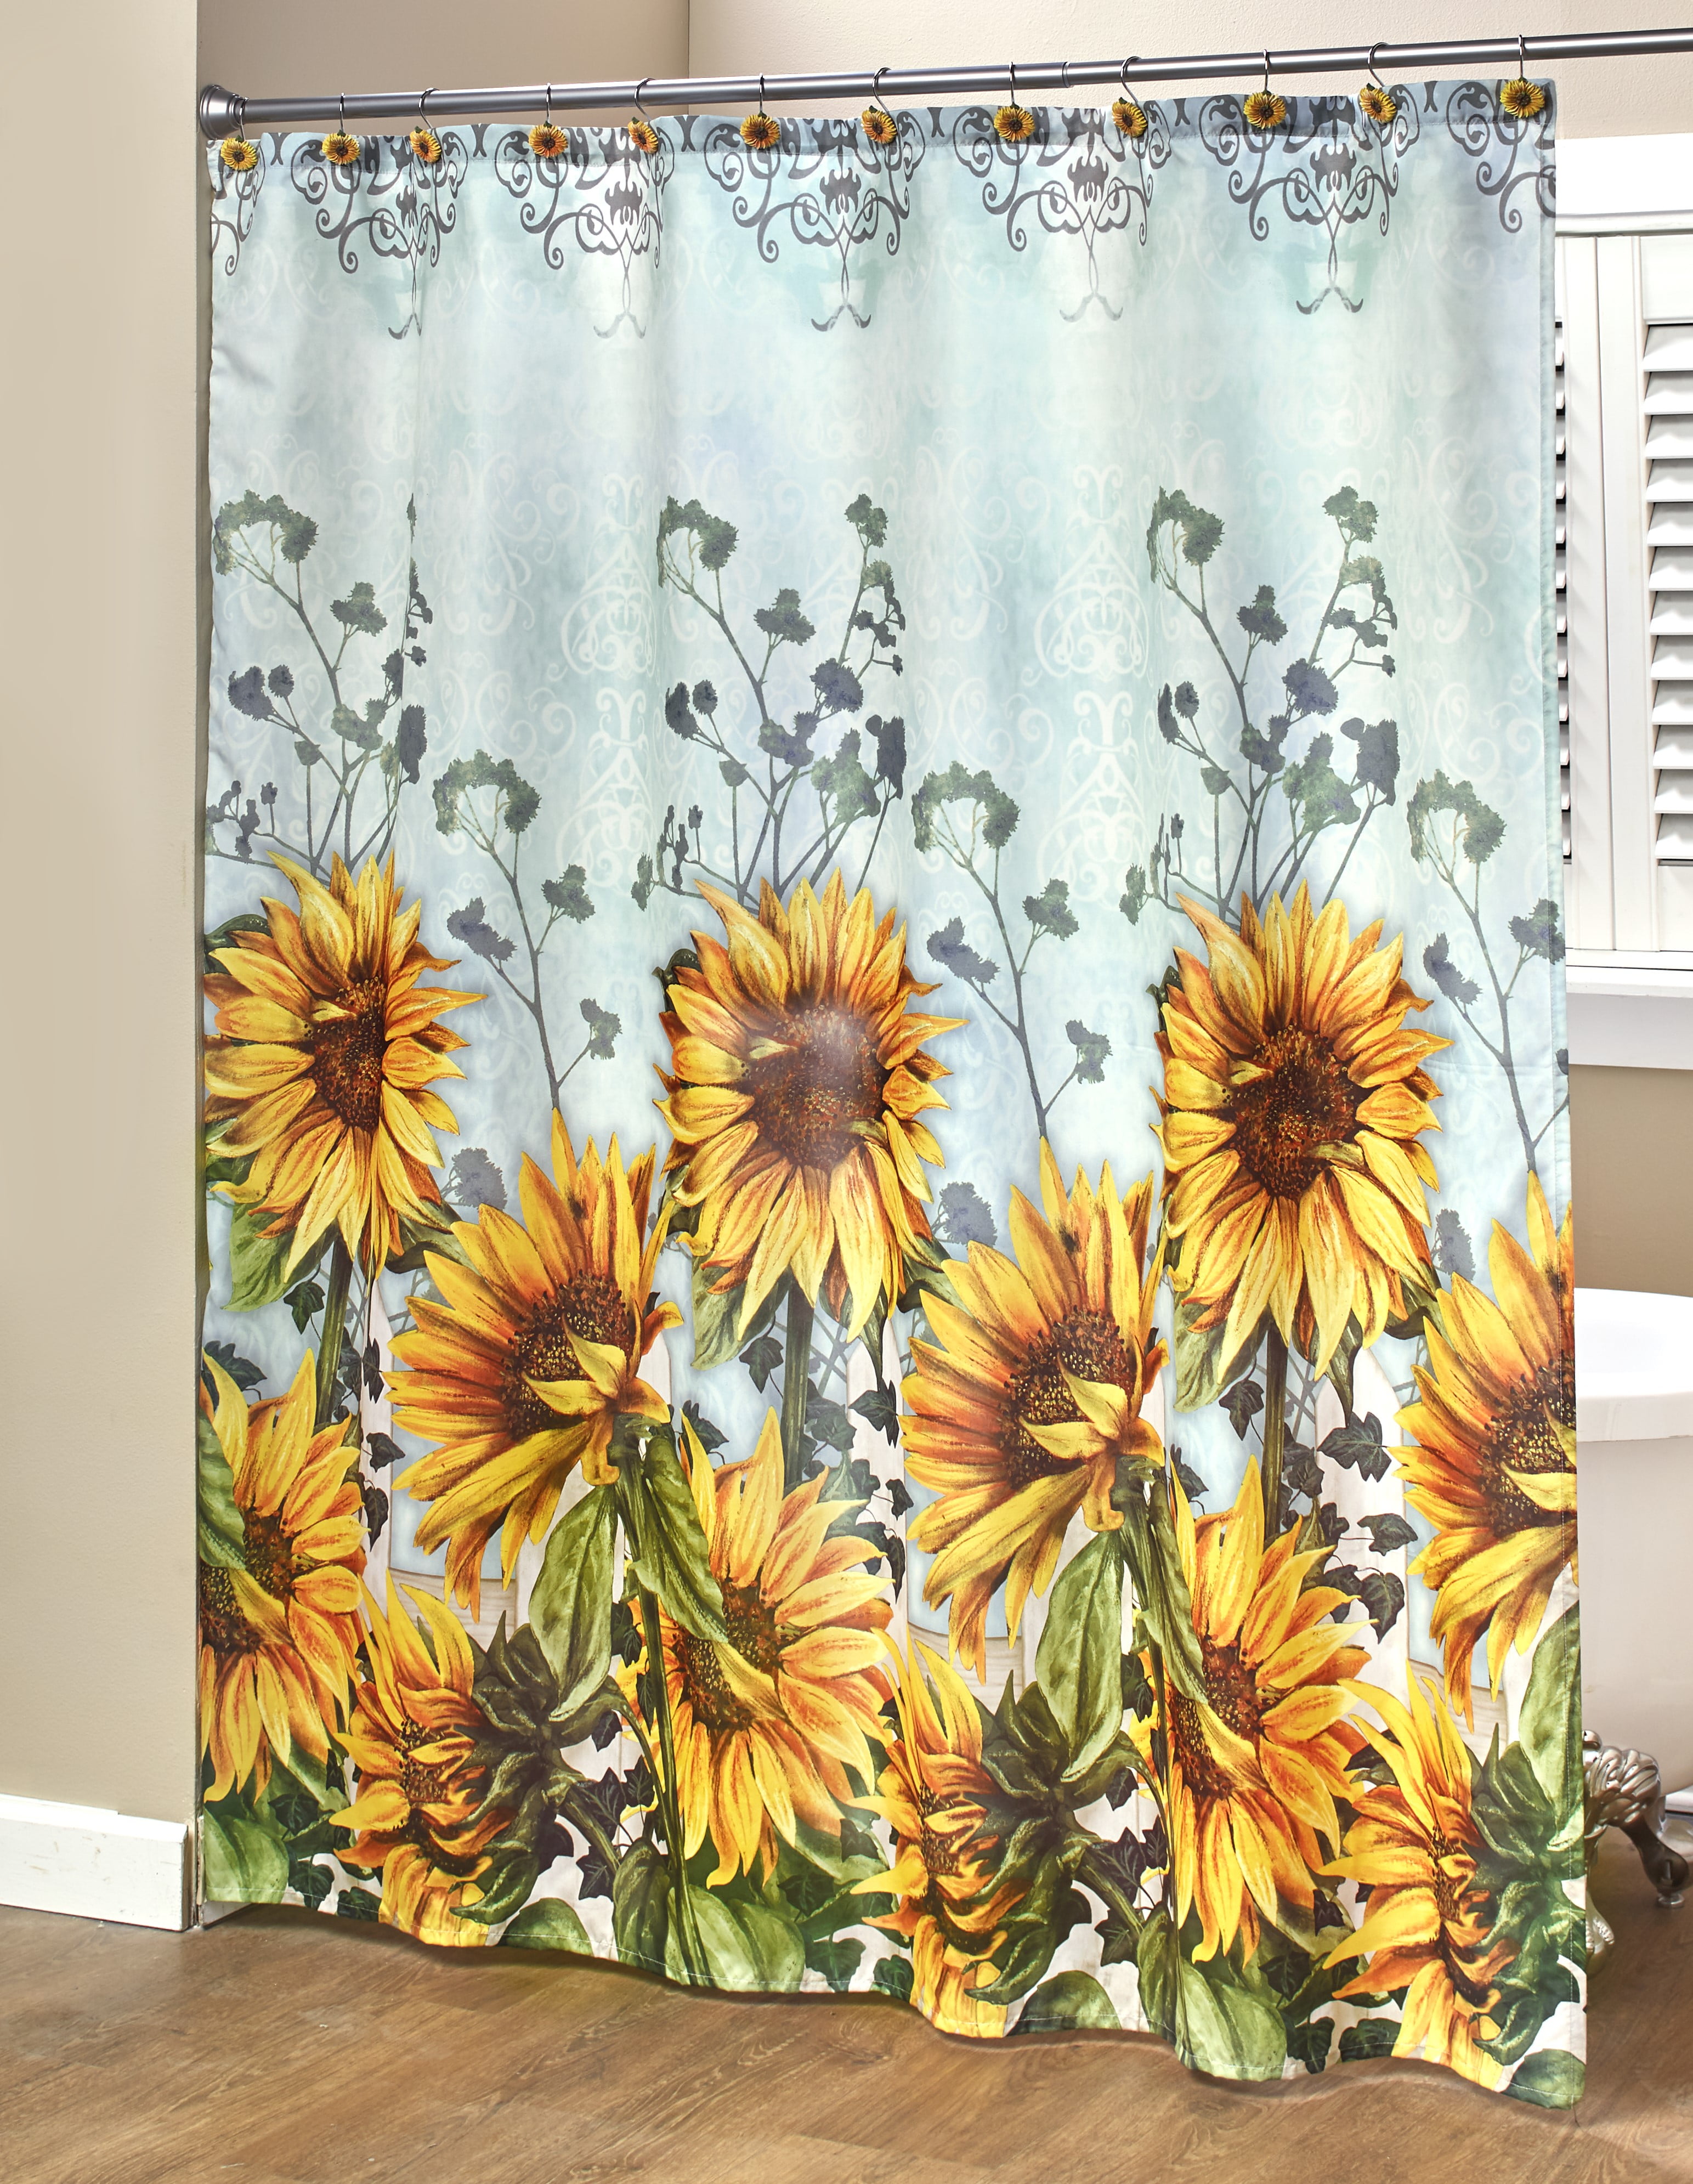 Sunflowers Floral Wooden Plant Flowers Butterfly Rustic Farmhouse Shower Curtain 